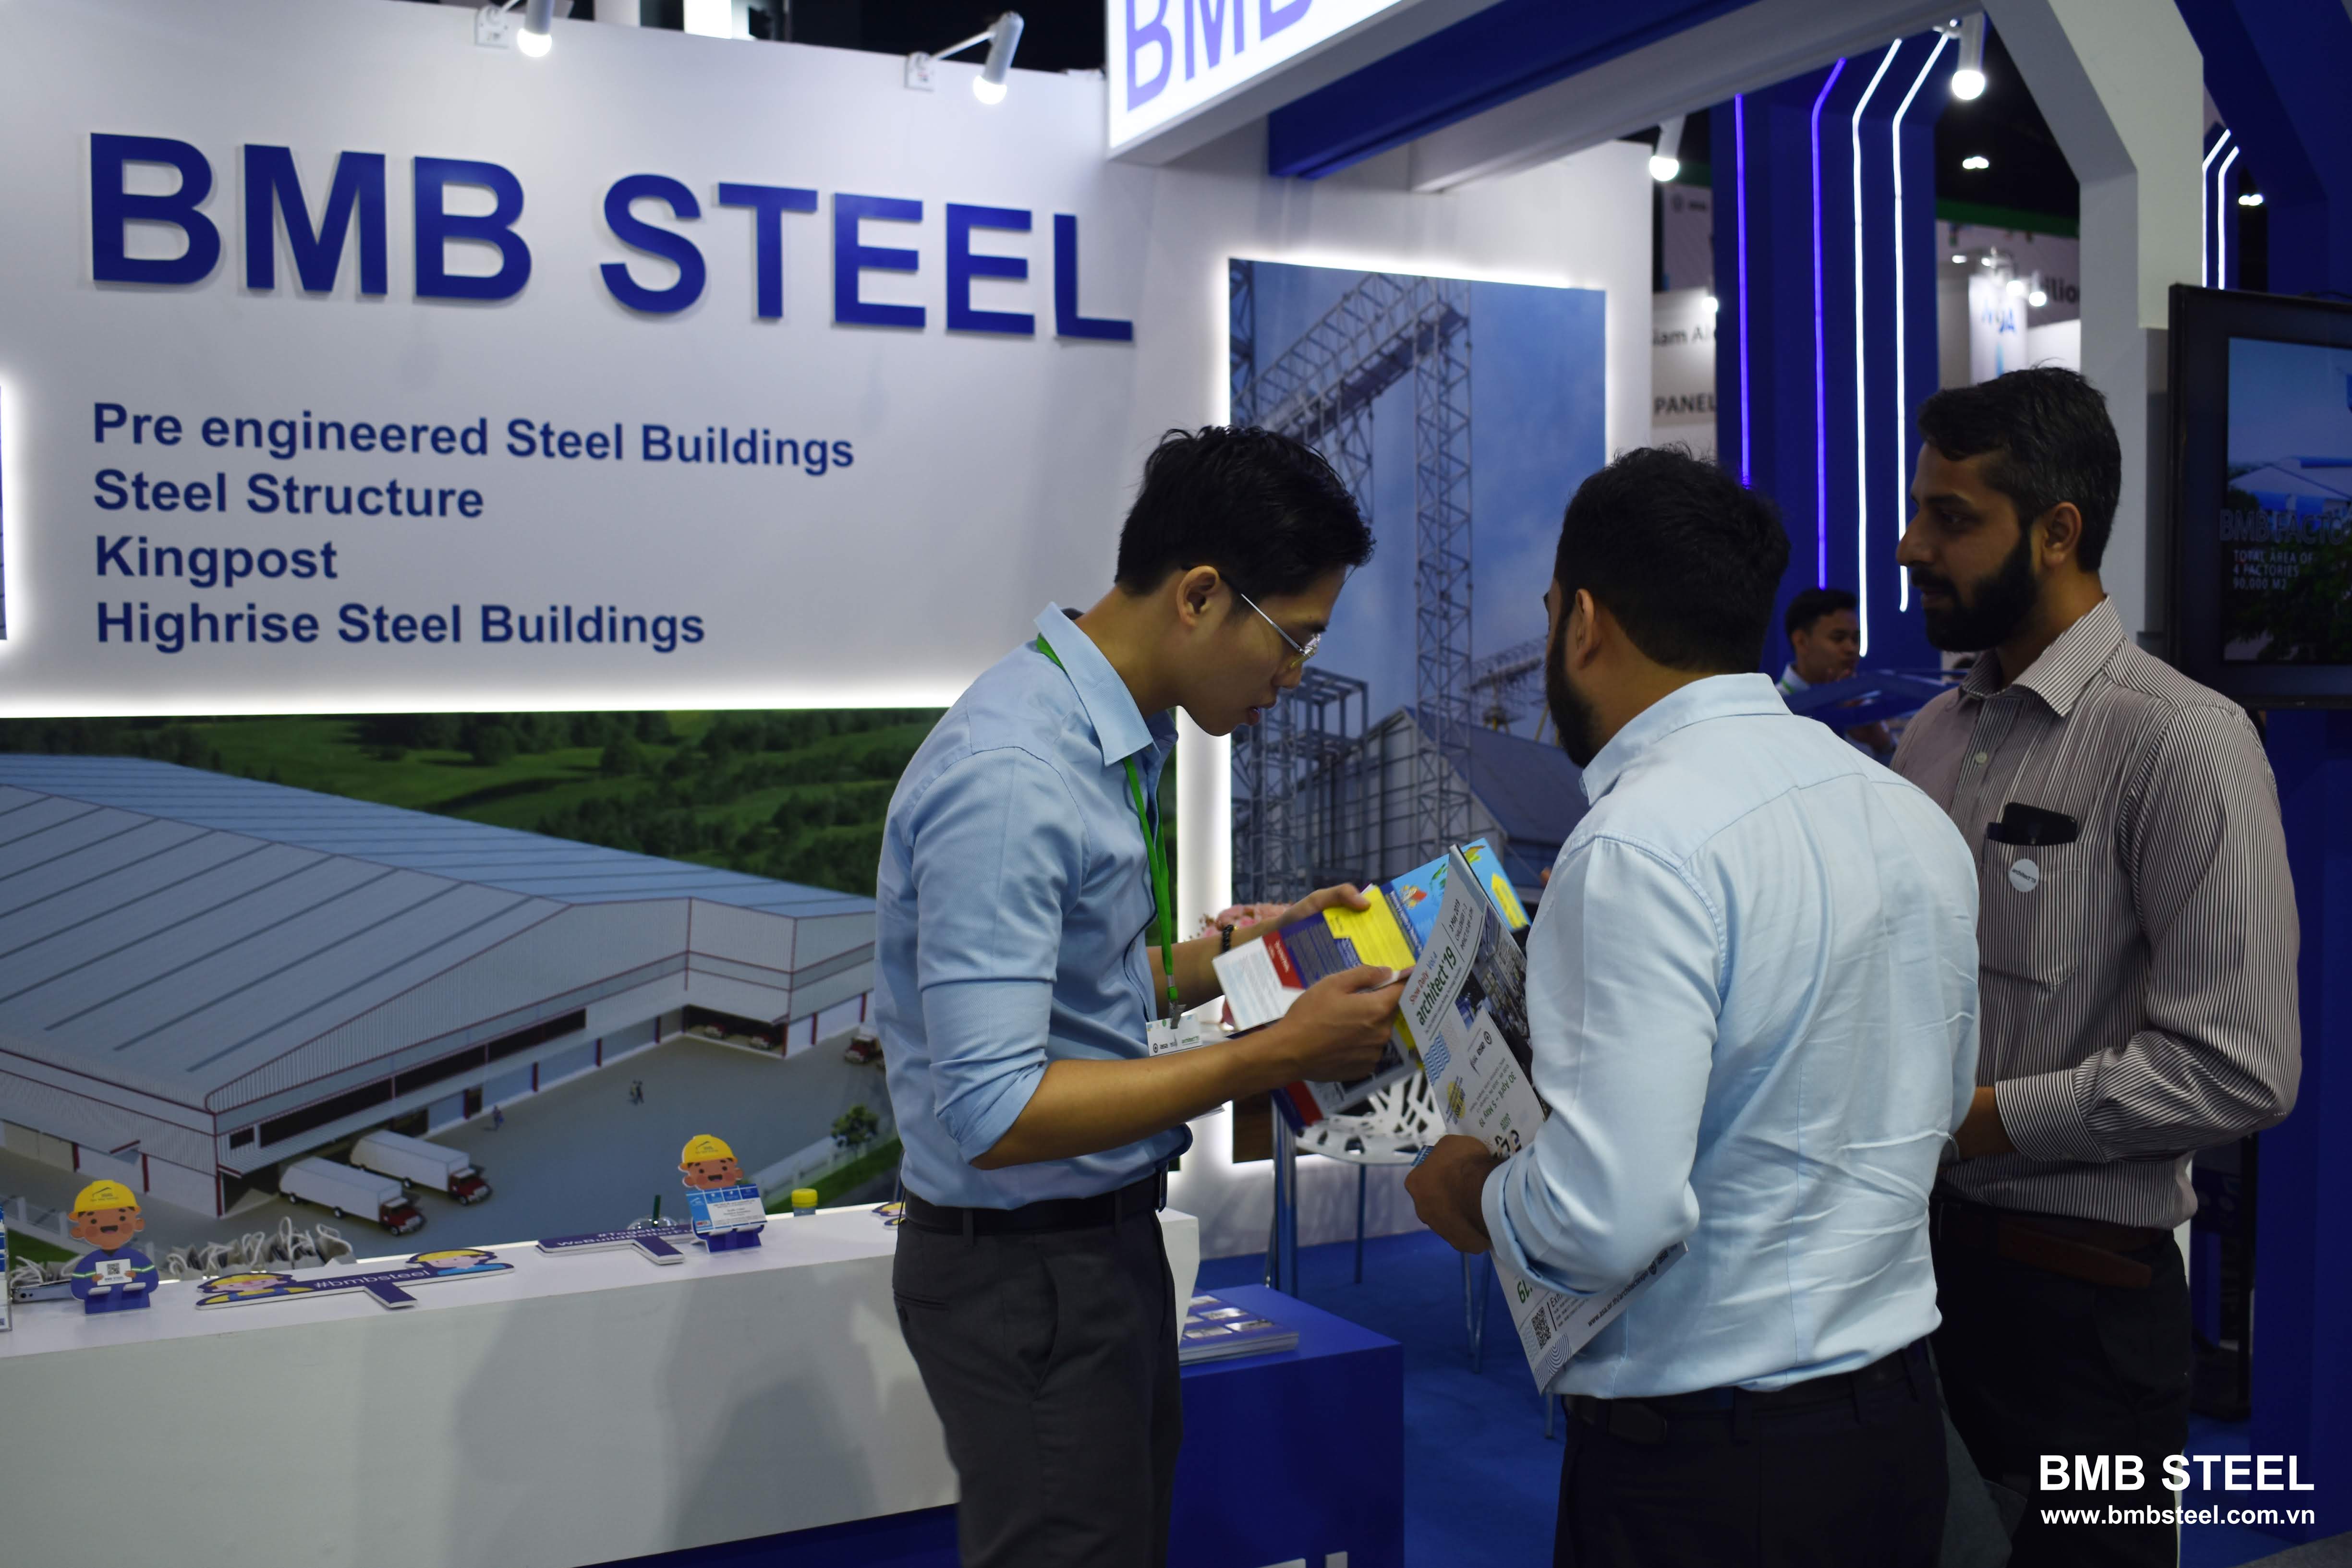 BMB Steel participated in Thai Architect'19 expo in Thailand 3